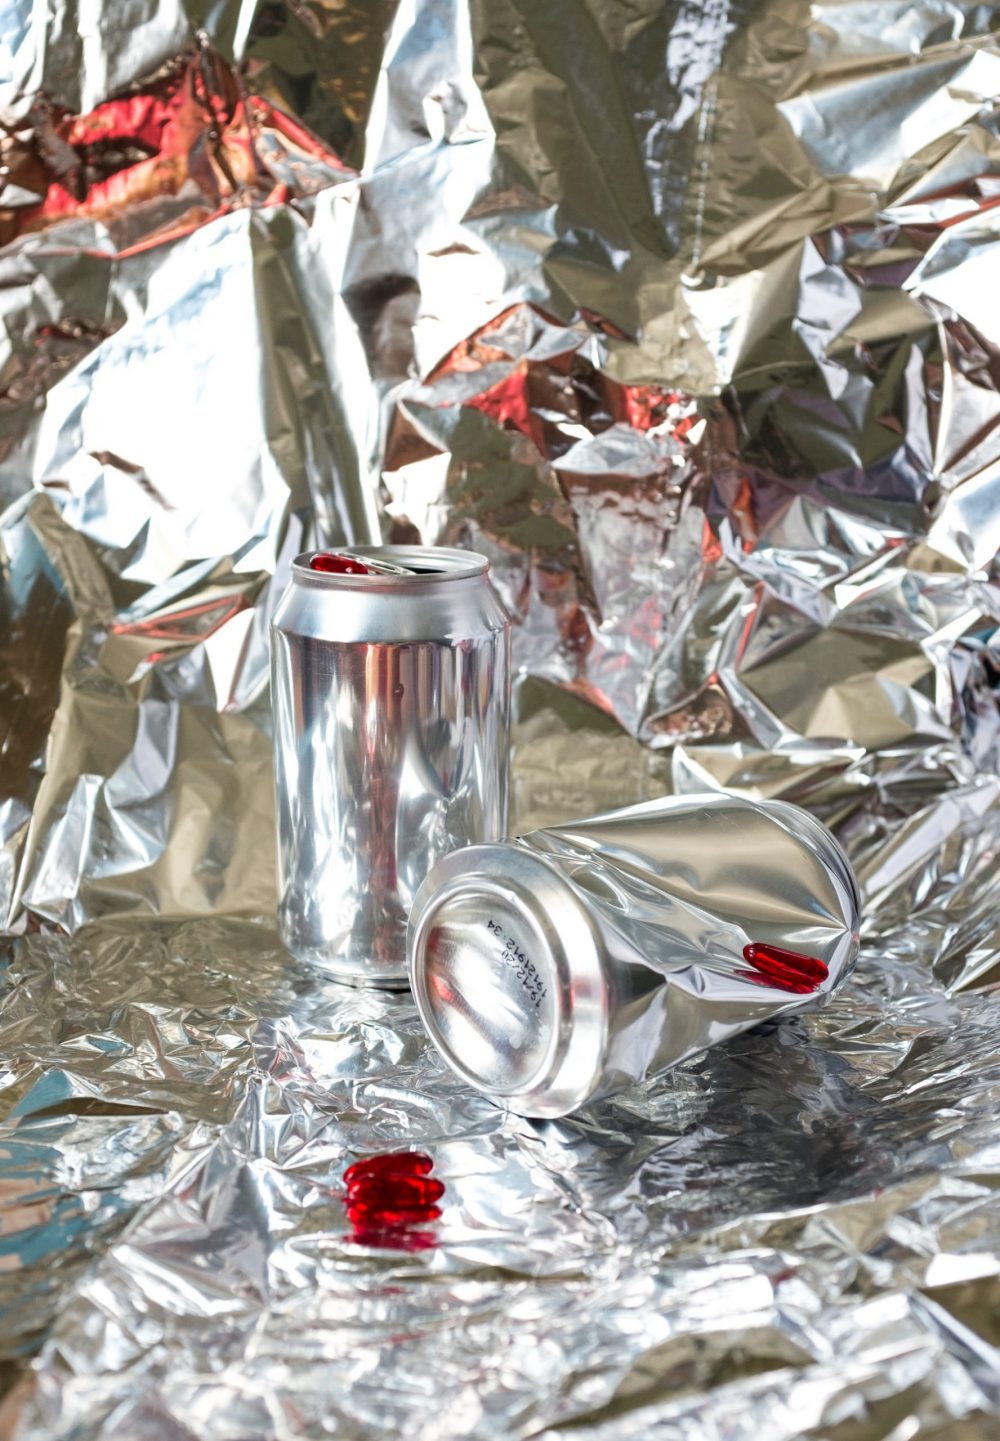 A picture of an aluminium can